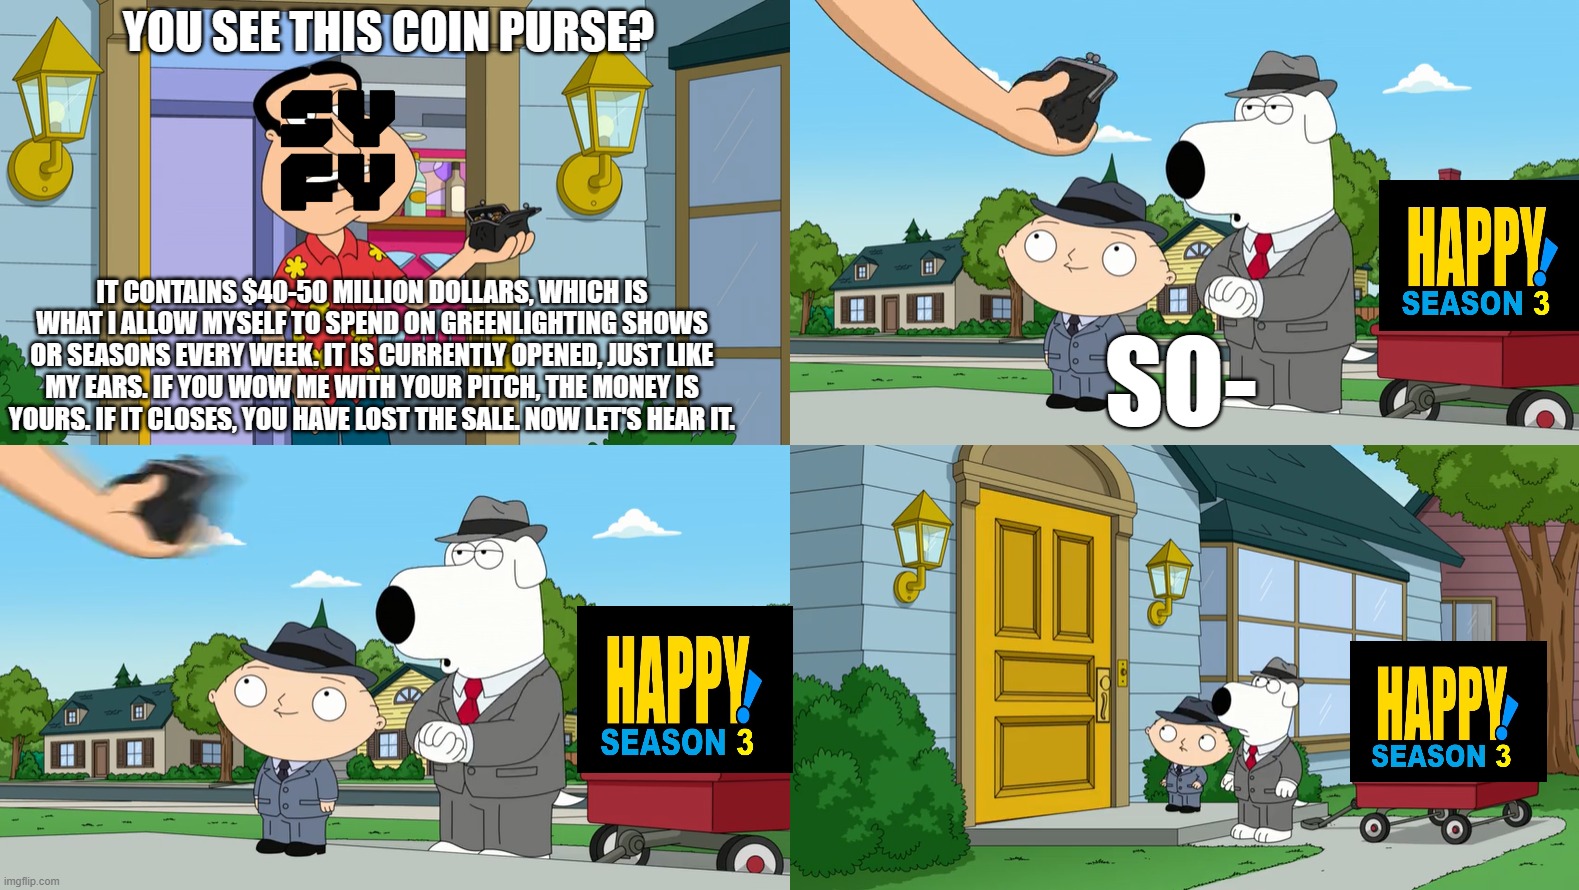 Family Guy Coin Purse Meme Happy! Edition | YOU SEE THIS COIN PURSE? IT CONTAINS $40-50 MILLION DOLLARS, WHICH IS WHAT I ALLOW MYSELF TO SPEND ON GREENLIGHTING SHOWS OR SEASONS EVERY WEEK. IT IS CURRENTLY OPENED, JUST LIKE MY EARS. IF YOU WOW ME WITH YOUR PITCH, THE MONEY IS YOURS. IF IT CLOSES, YOU HAVE LOST THE SALE. NOW LET'S HEAR IT. SO- | image tagged in family guy,quagmire,brian,stewie,syfy,happy | made w/ Imgflip meme maker